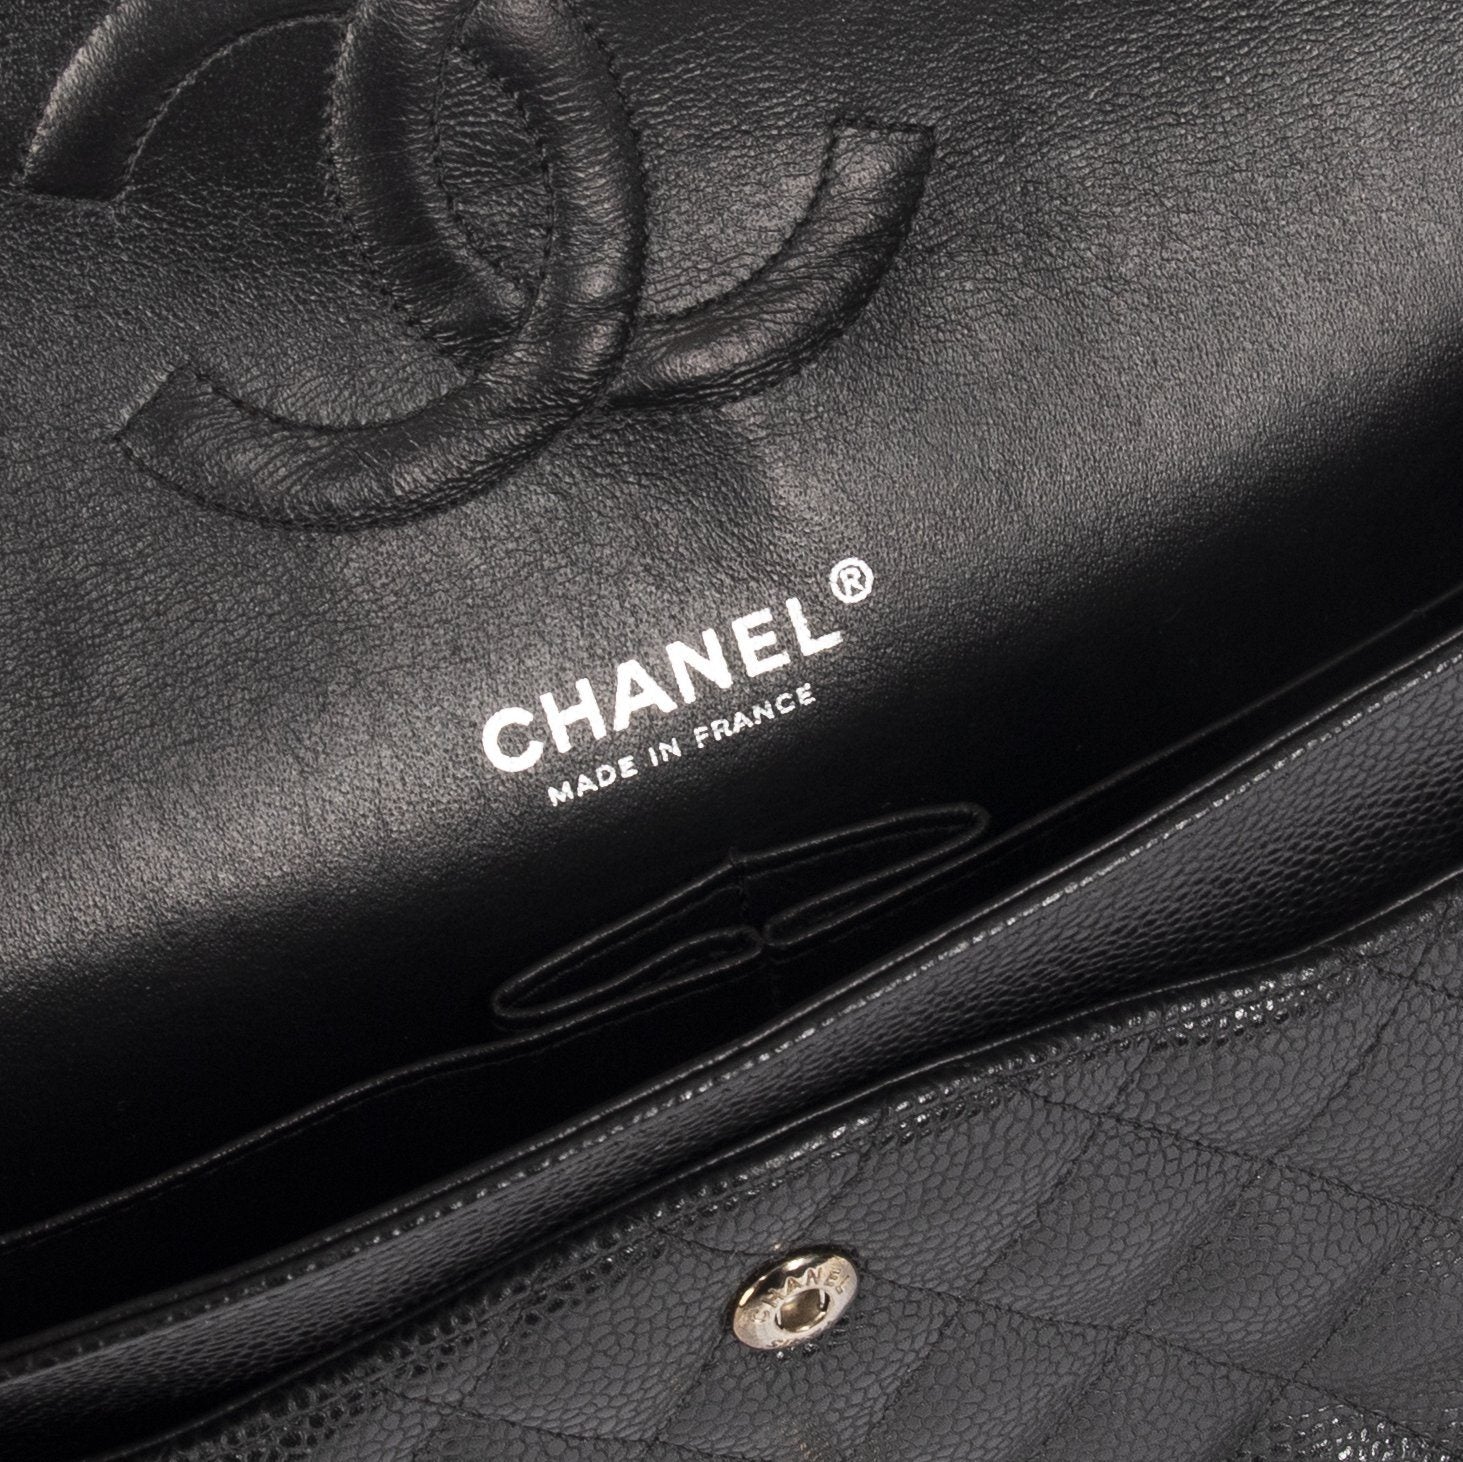 Chanel Rare Silver HW Black Quilted Caviar Medium Classic Double